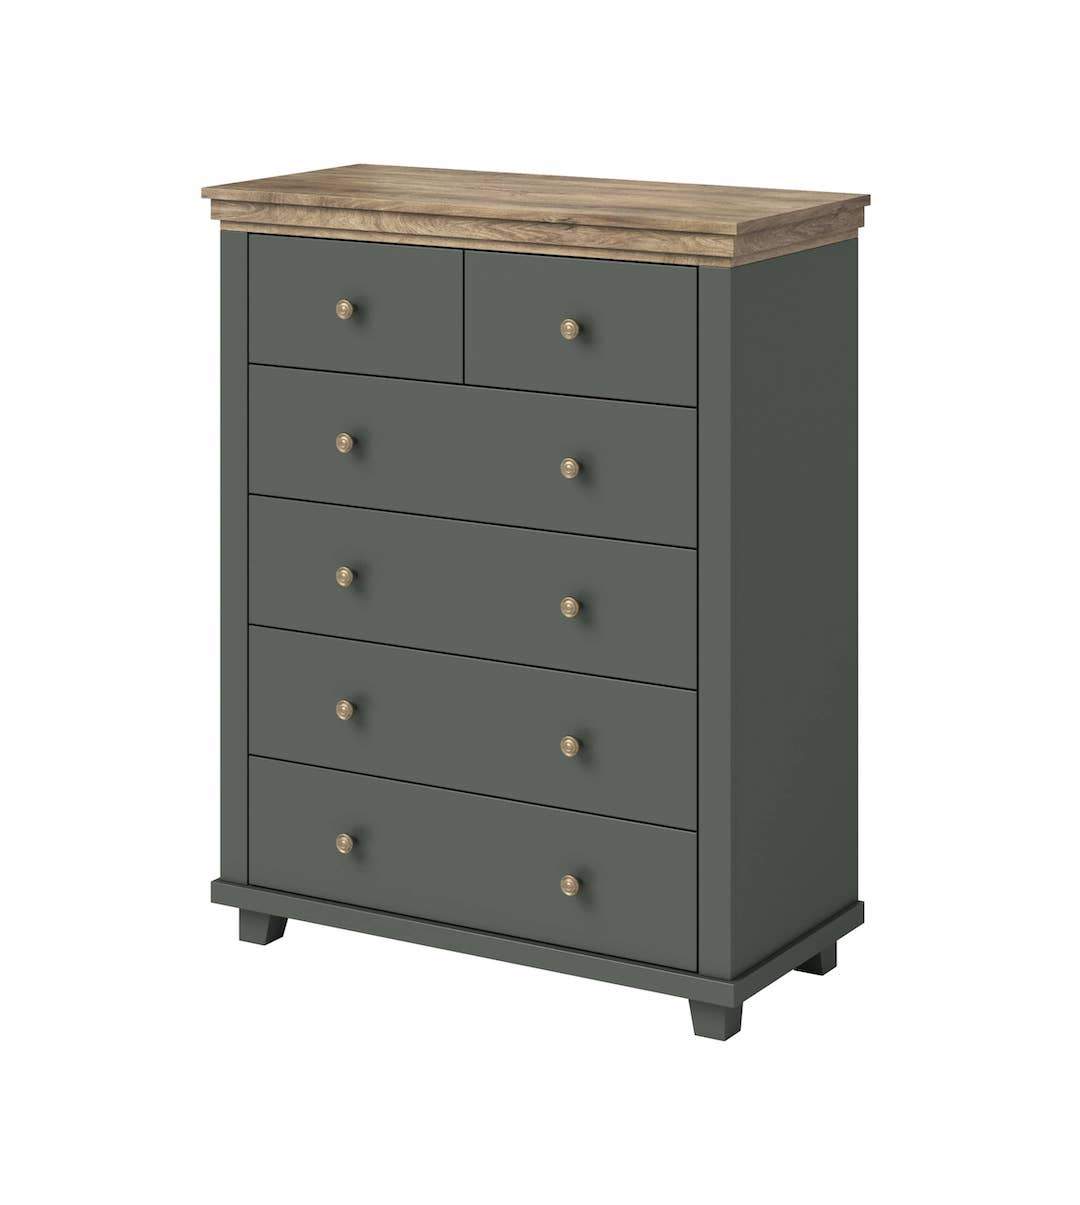 View Evora 45 Chest of Drawers Green 90cm information